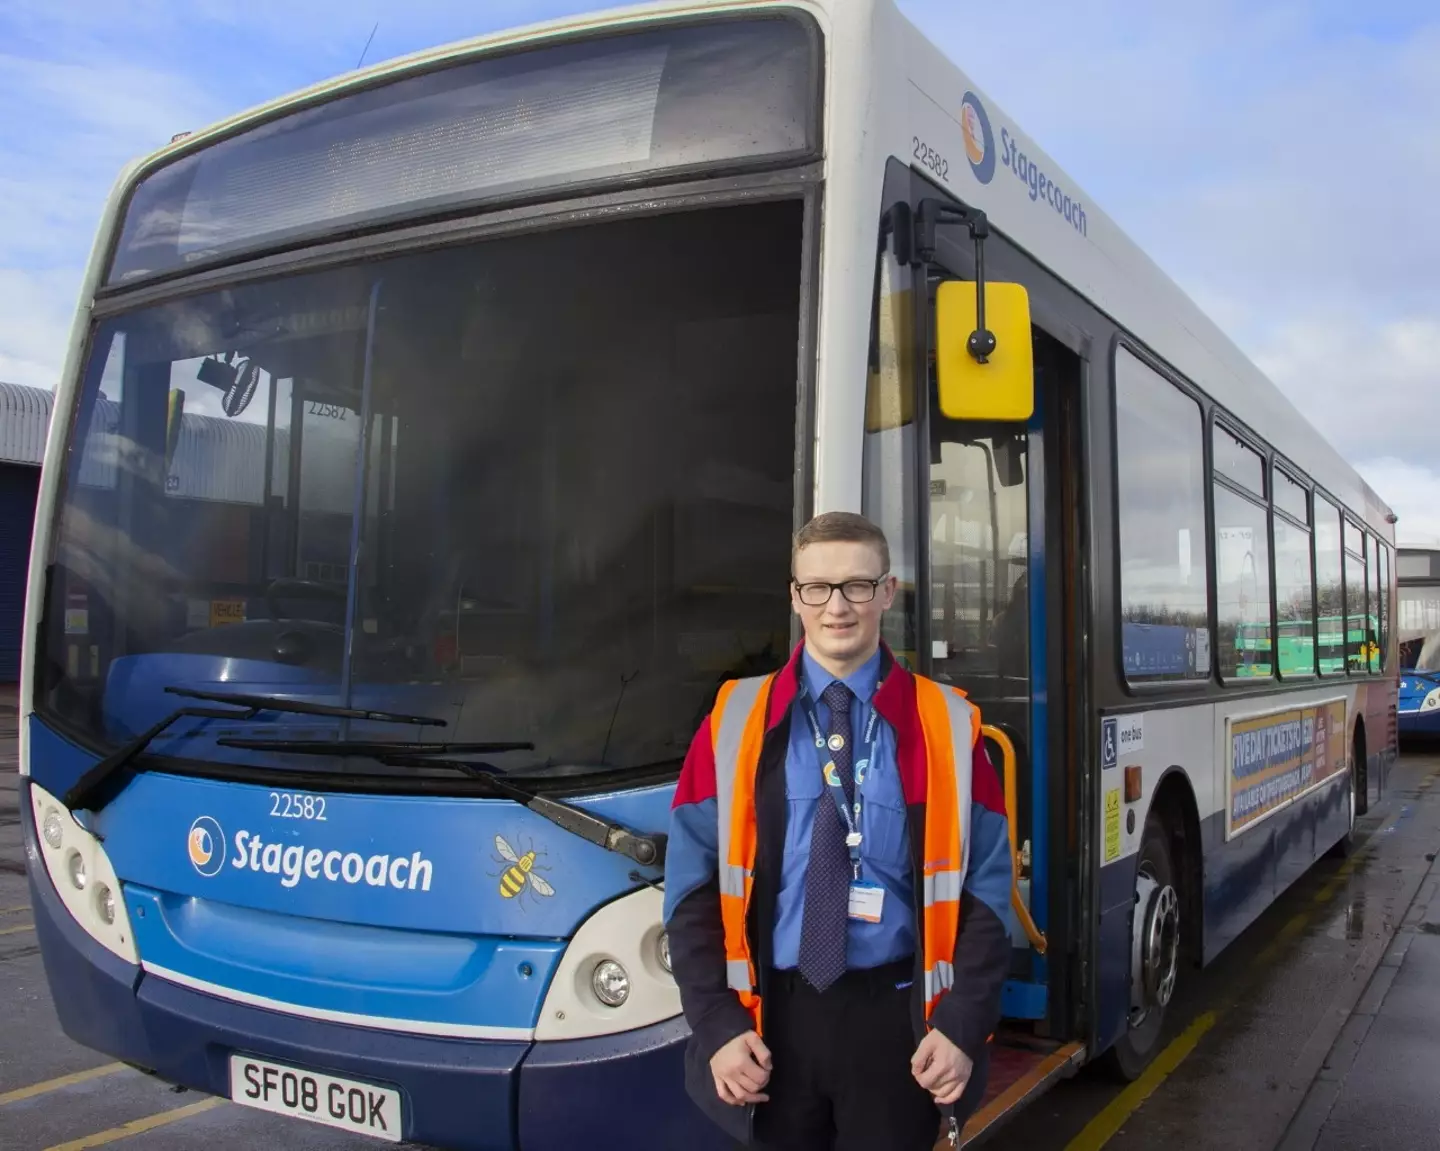 Jamie became a bus driver as soon as he turned 18.